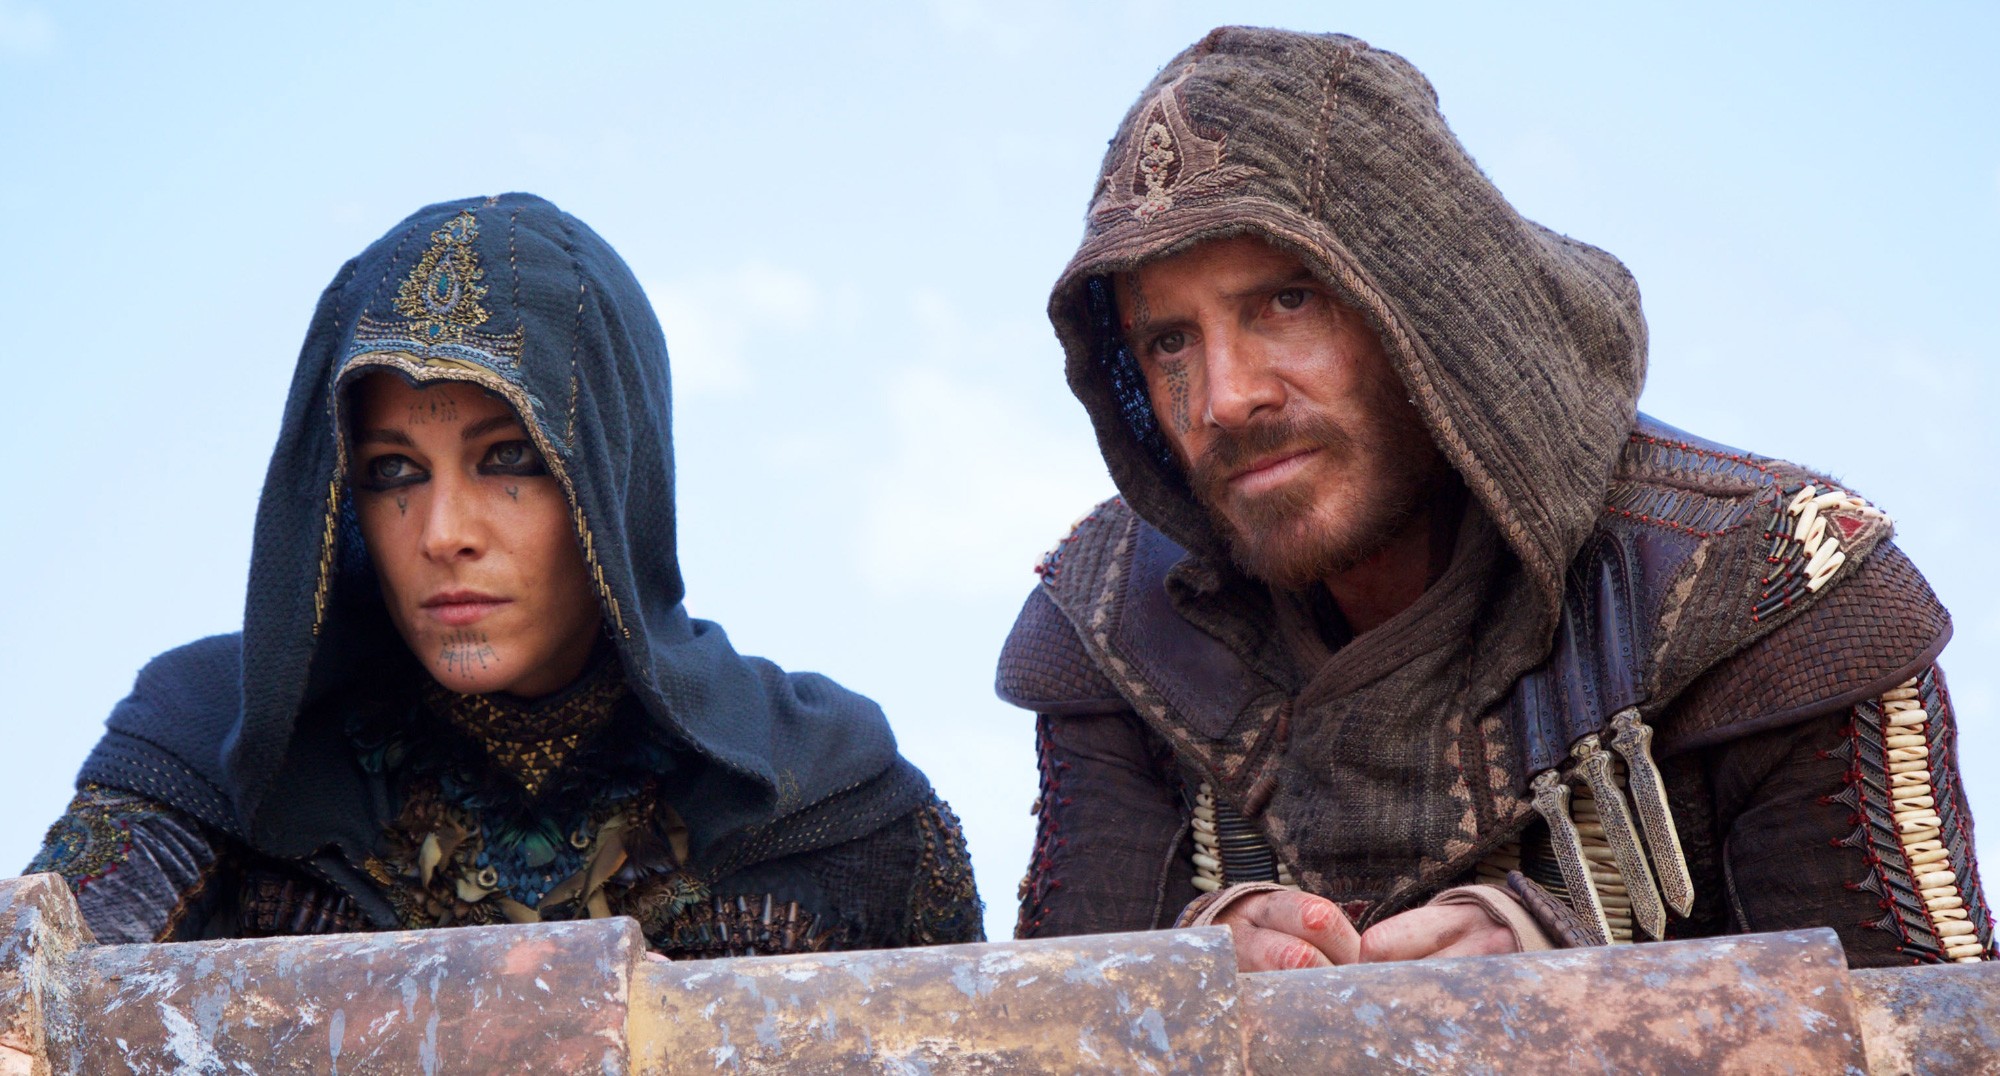 'Assassins Creed' movie review by Lucas Mirabella